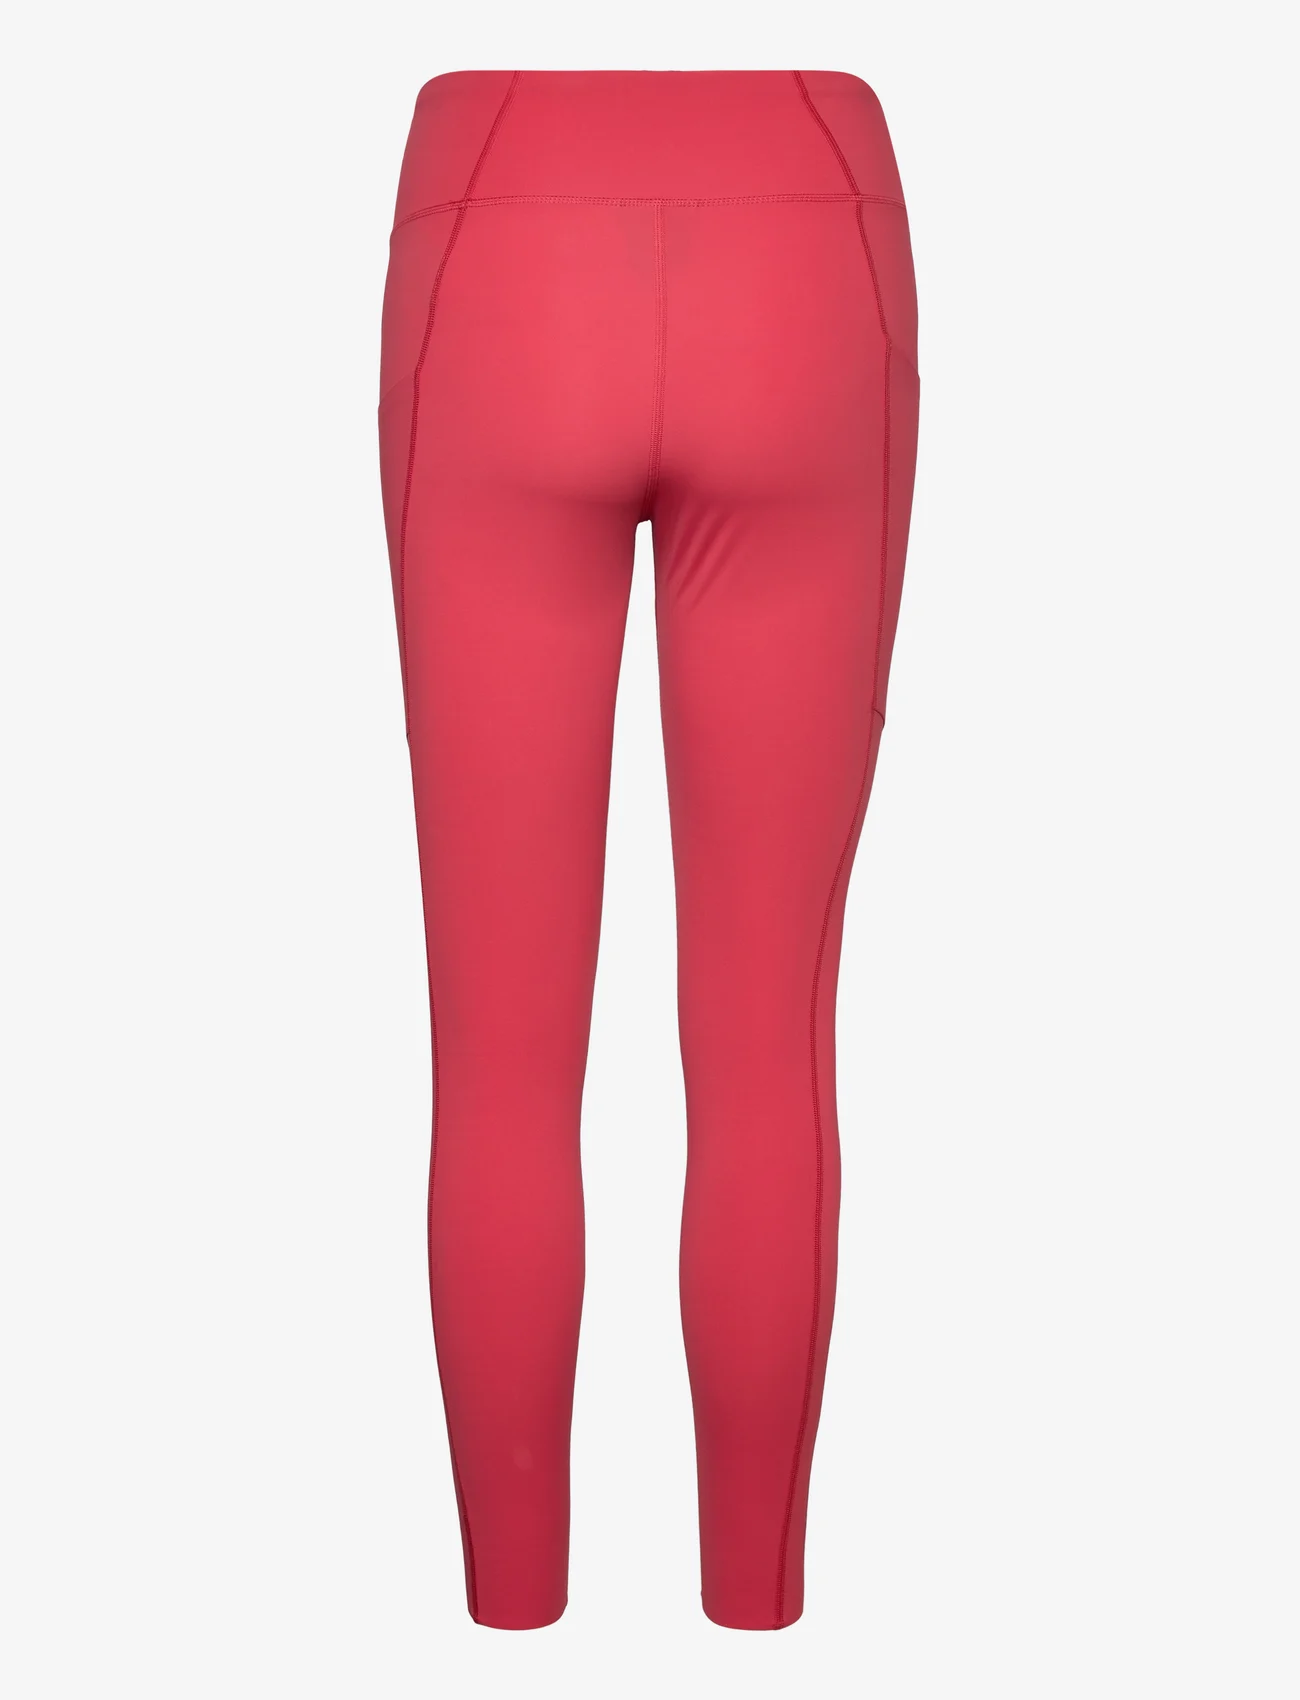 Peak Performance - W Power Tights-SOFTER RED - kompressionstights - softer red - 1